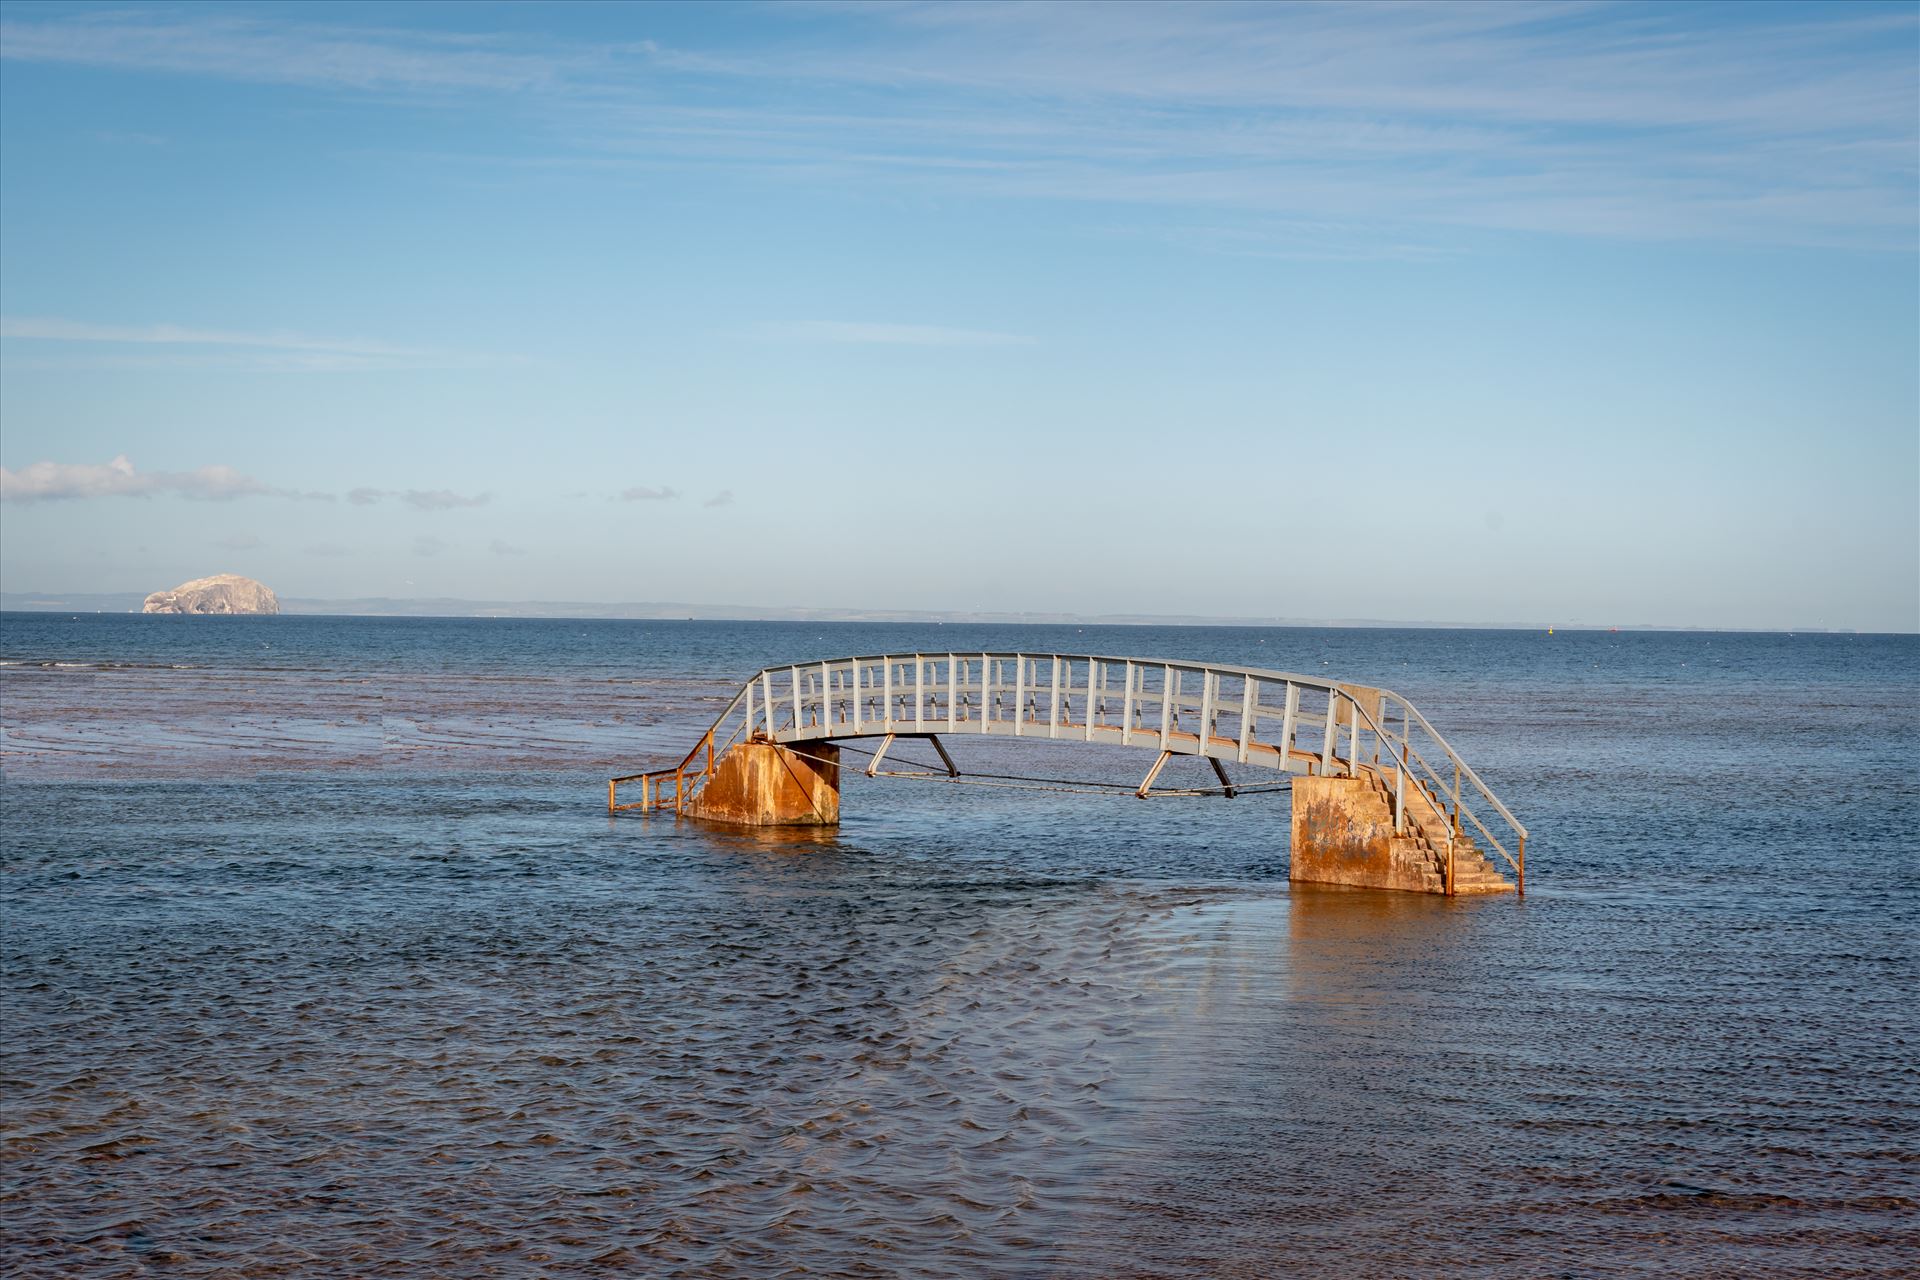 \'Bridge to Nowhere\u2019, Dunbar, Scotland - When the tide comes surging into shore, what should be an easy path to the beach becomes suddenly impassable. At high tide, the water swallows the land around the bridge, making it look as though it’s stranded in the middle of a sea. by Graham Dobson Photography